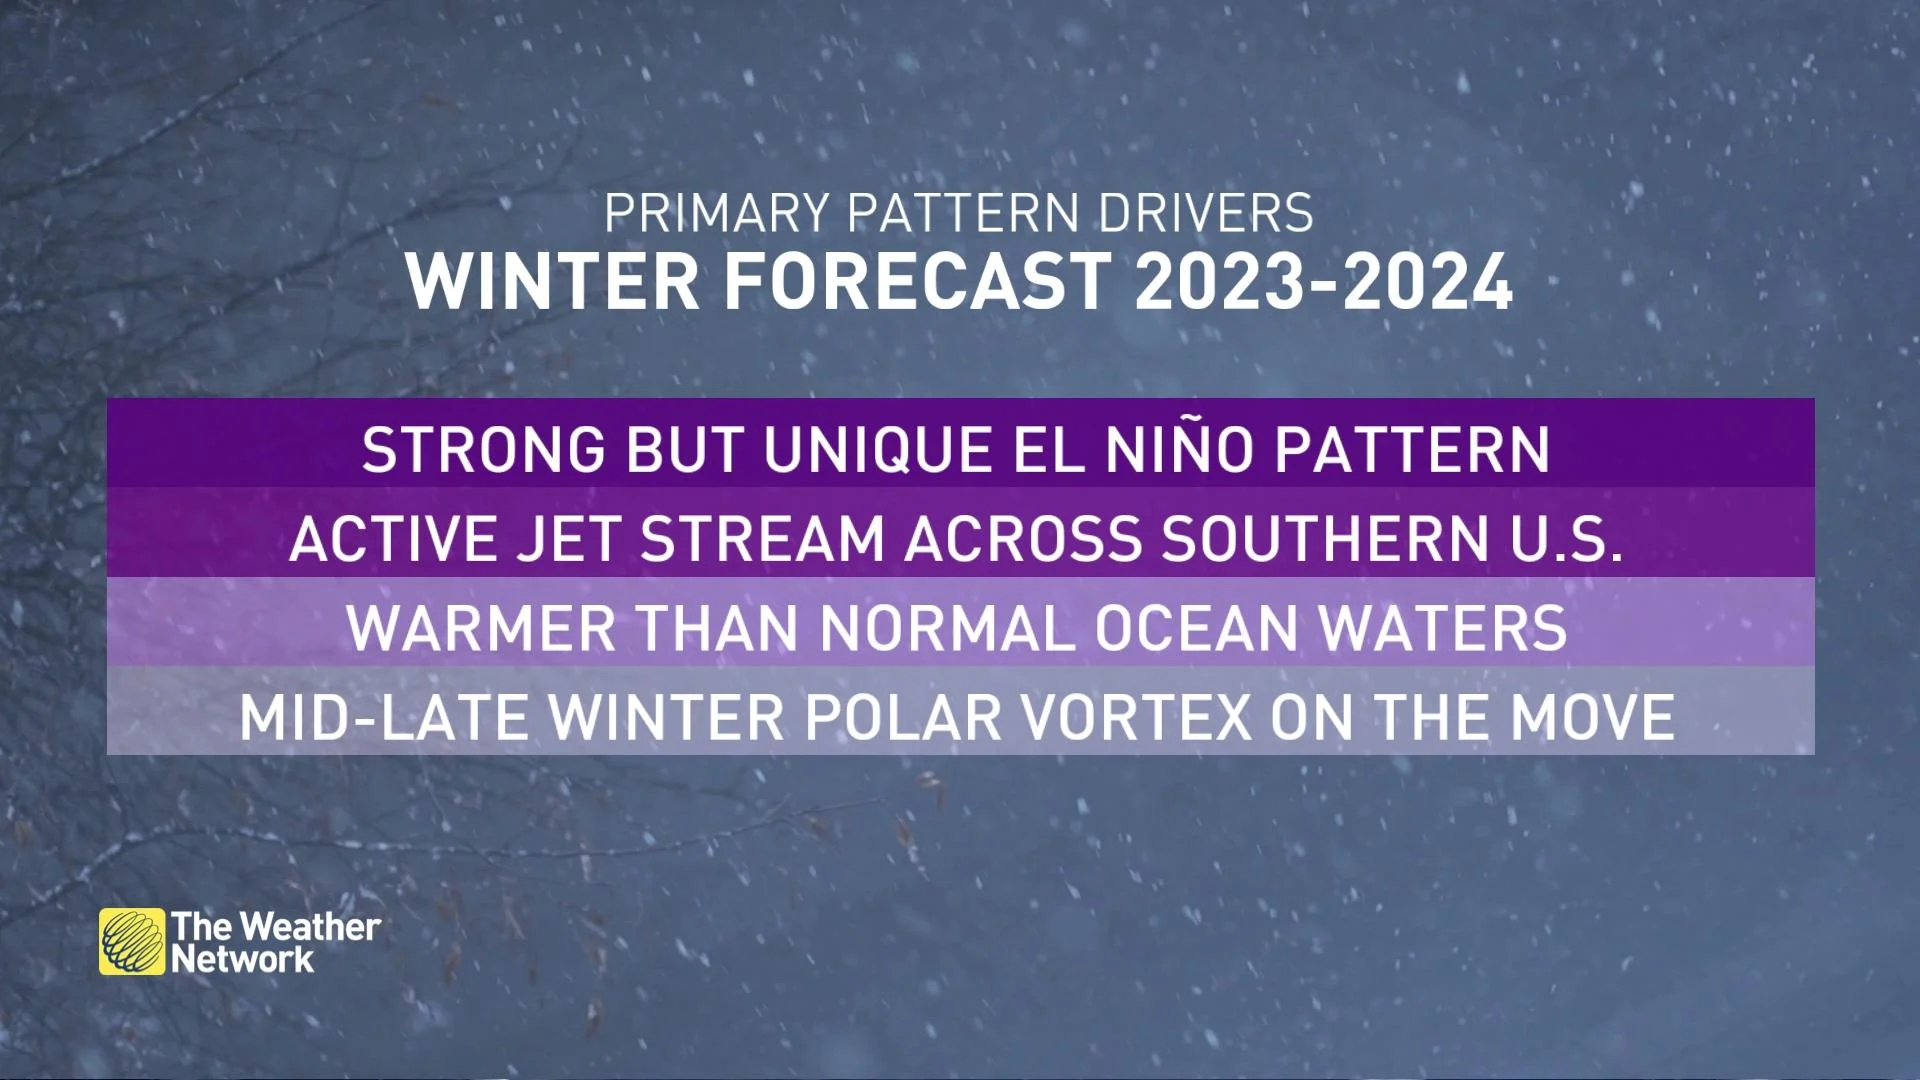 U.S. Winter Forecast Primary Pattern Drivers